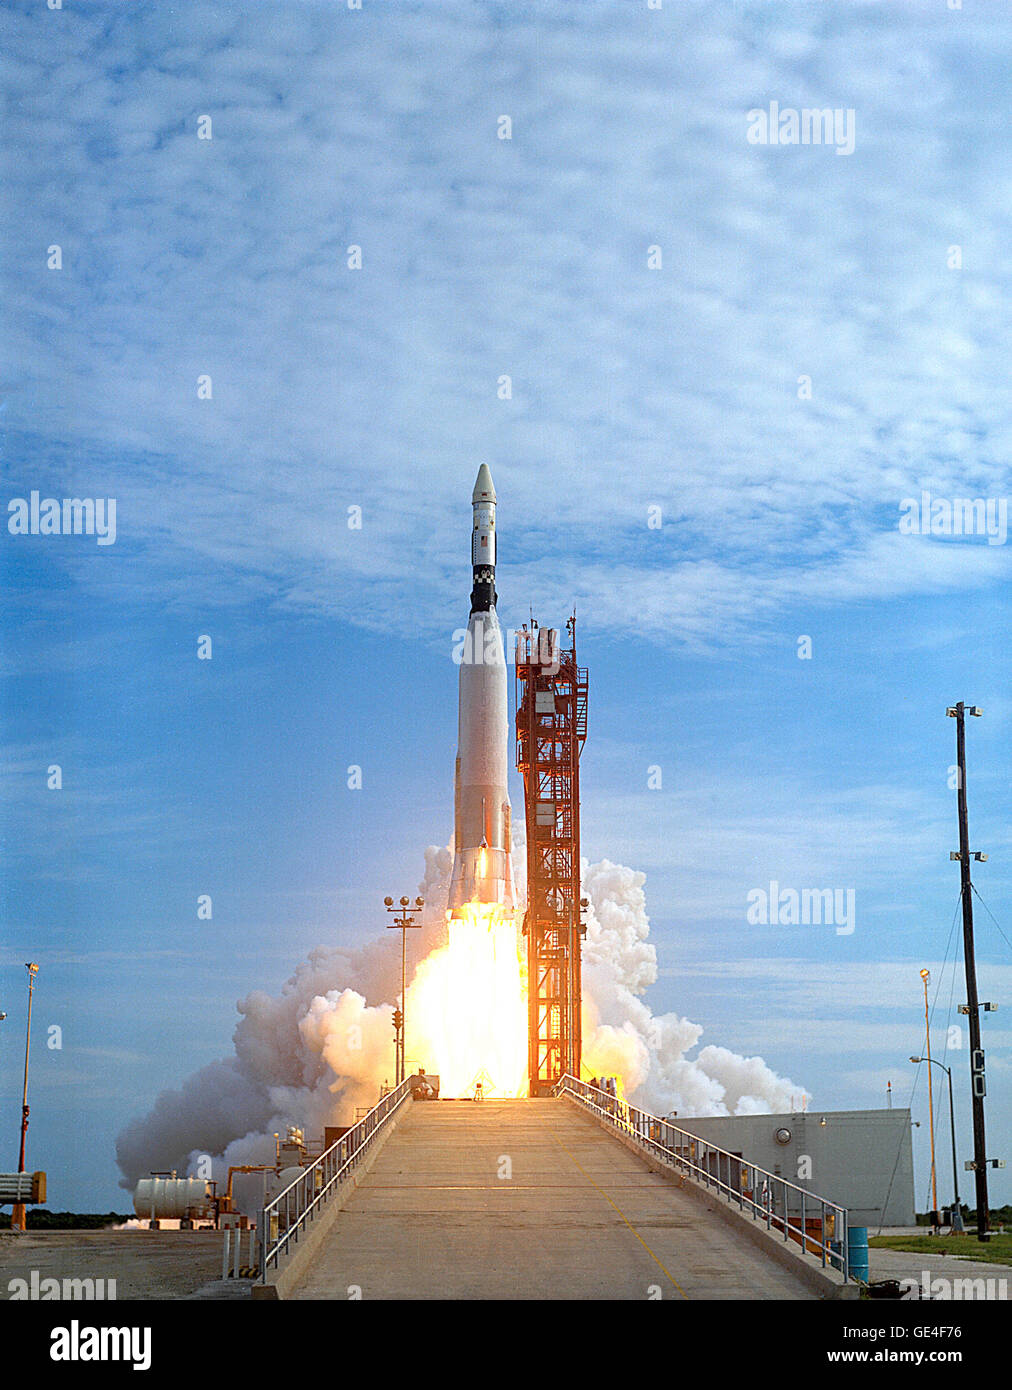 Gemini 11 Spacecraft Lift-Off From Launch Complex 19 8x10 Photo S2-328 